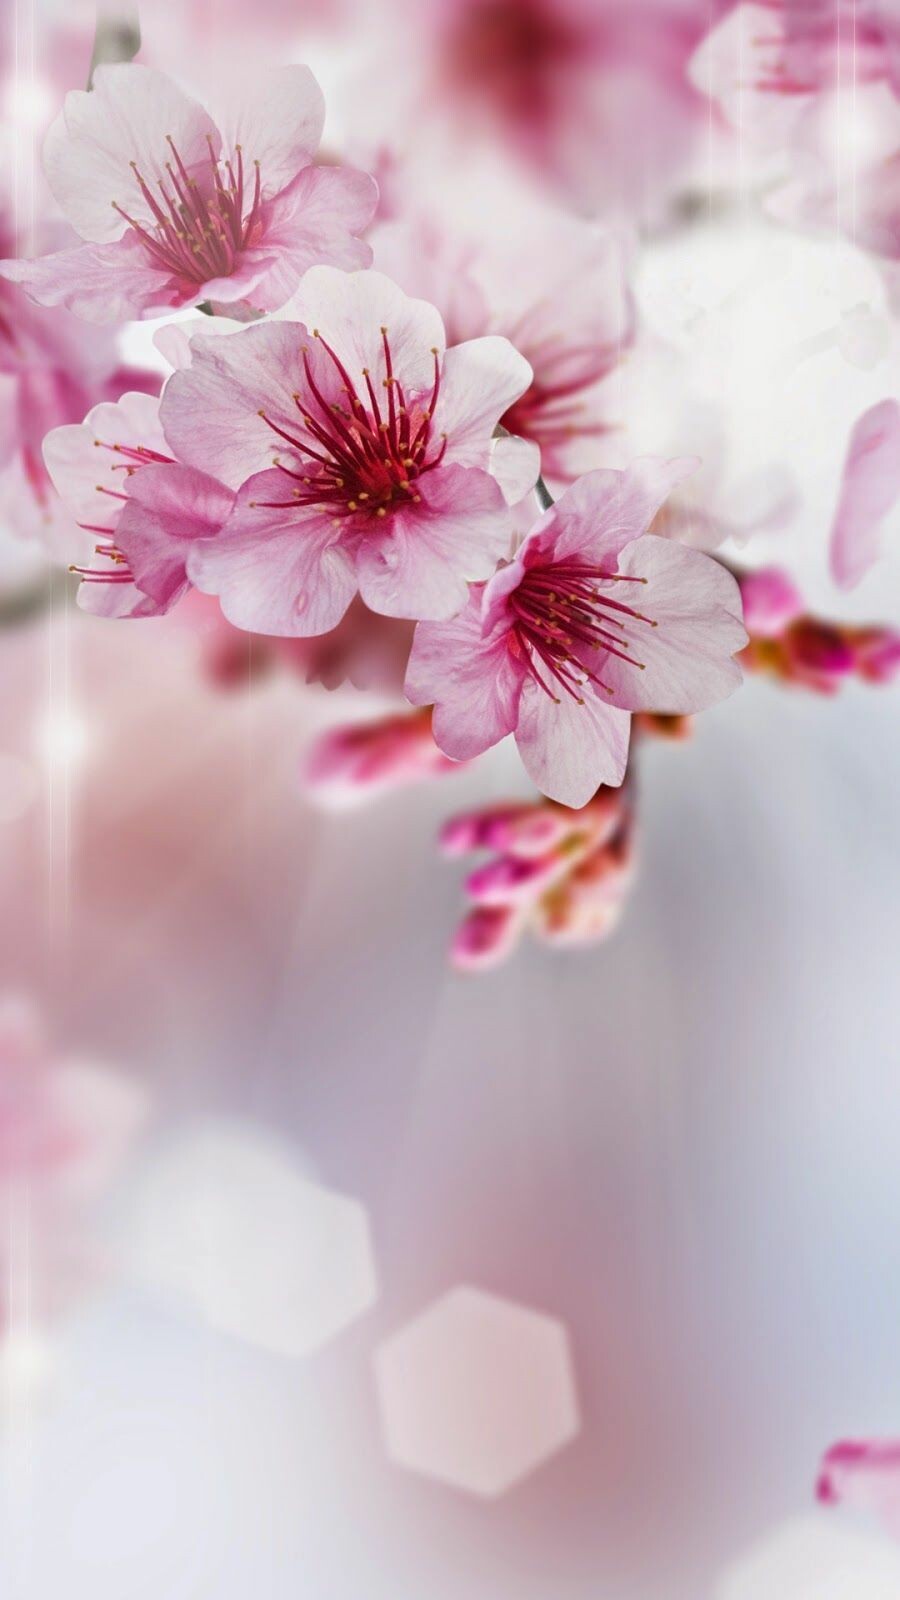 Floral Spring iPhone Wallpaper: HD, 4K, 5K for PC and Mobile. Download free image for iPhone, Android